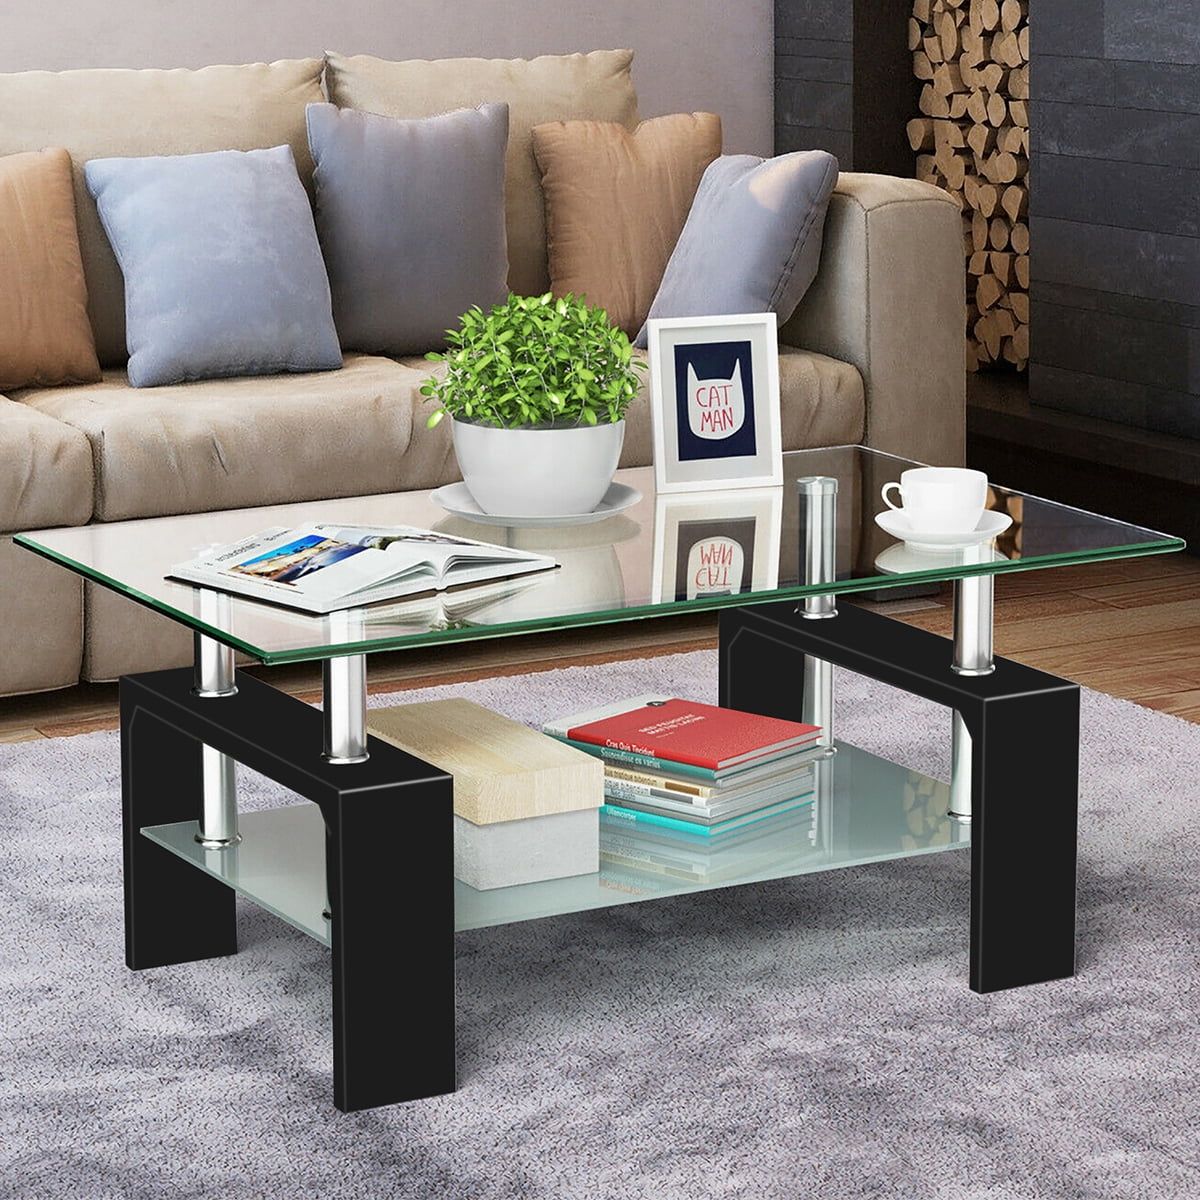 Sugift Clear Rectangle Modern Glass Coffee Table With Lower Shelf, Metal  Legs For Living Room – Walmart With Regard To Glass Coffee Tables With Lower Shelves (View 2 of 15)